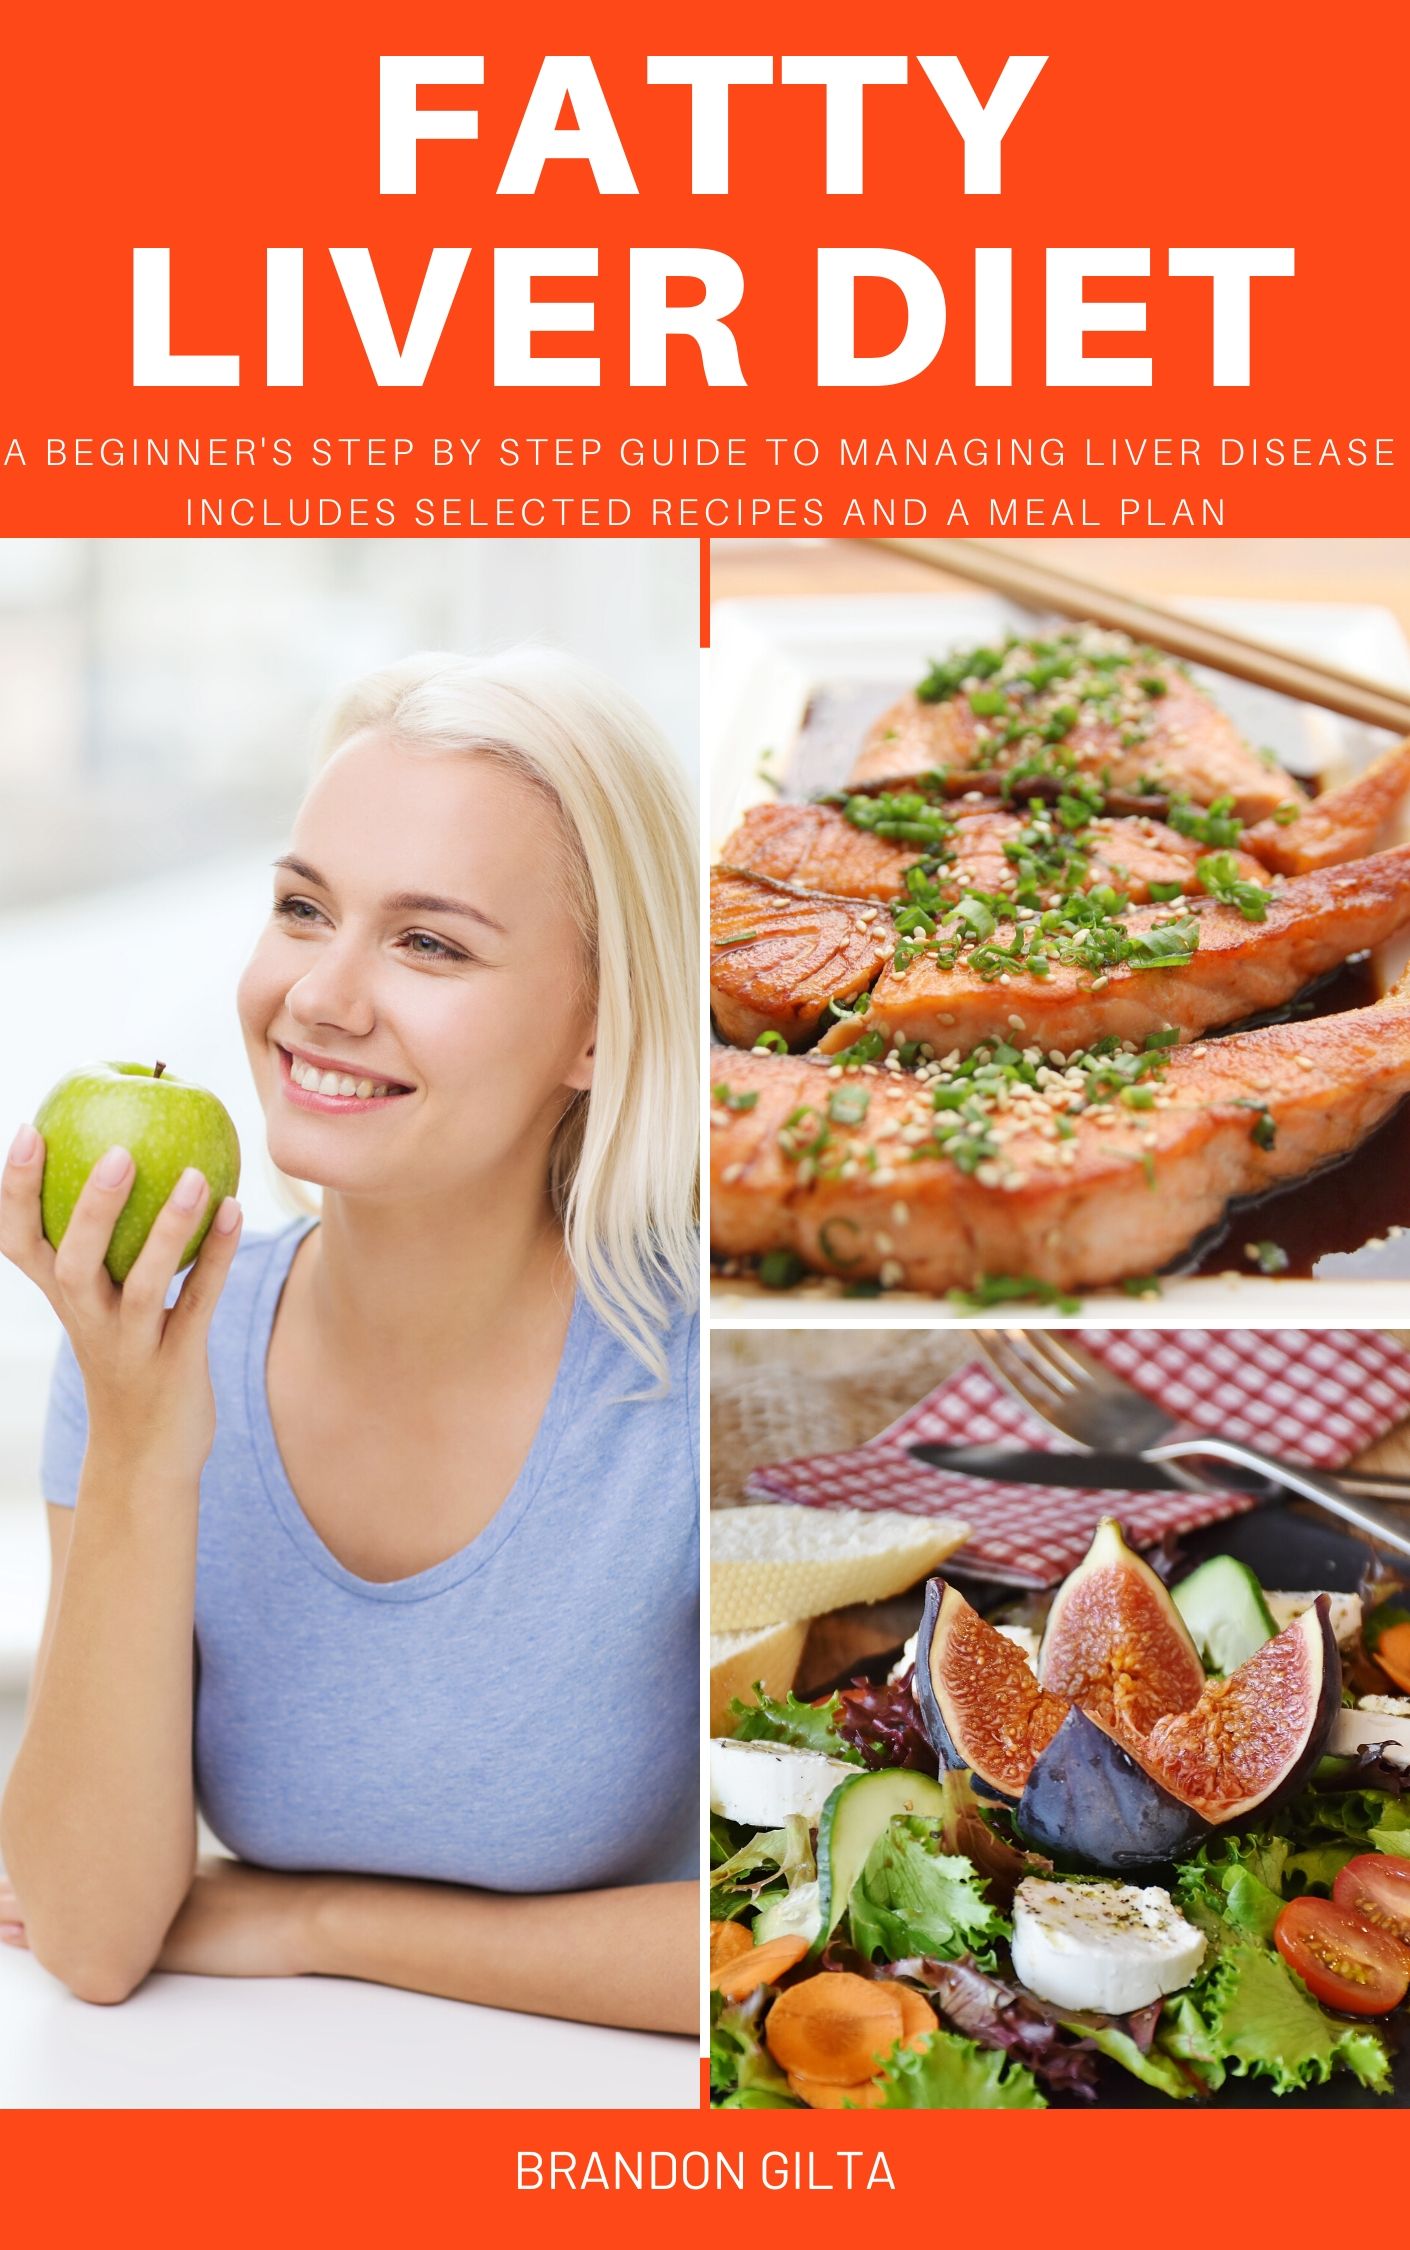 FREE: Fatty Liver Diet: A Beginner’s Step by Step Guide to Managing Fatty Liver Disease by Brandon Gilta